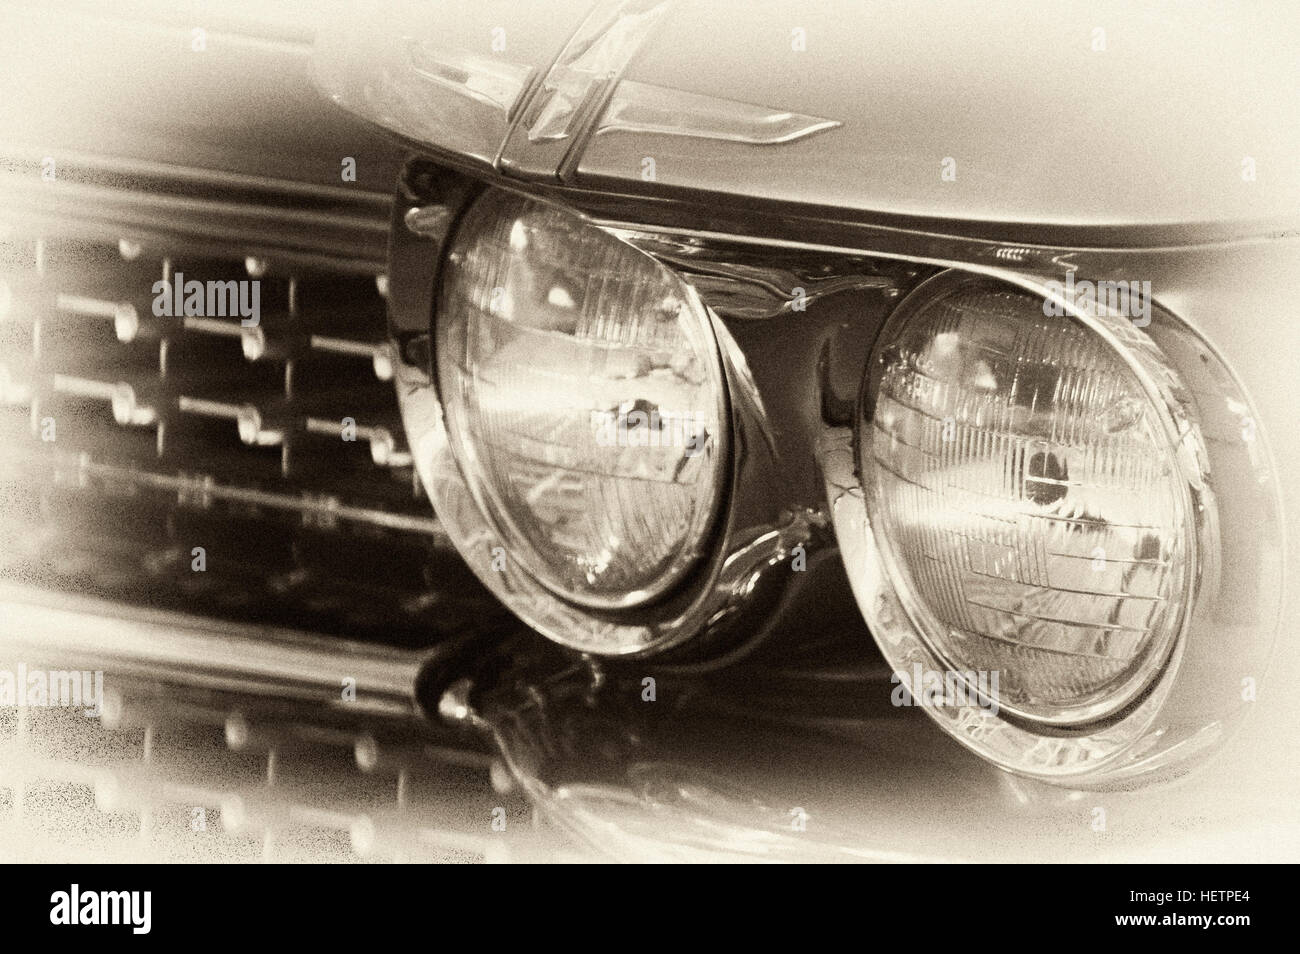 Photo Cadillac Coupe De Ville, Year 1959, 2-door  coupe, radiator grille, Stock Photo